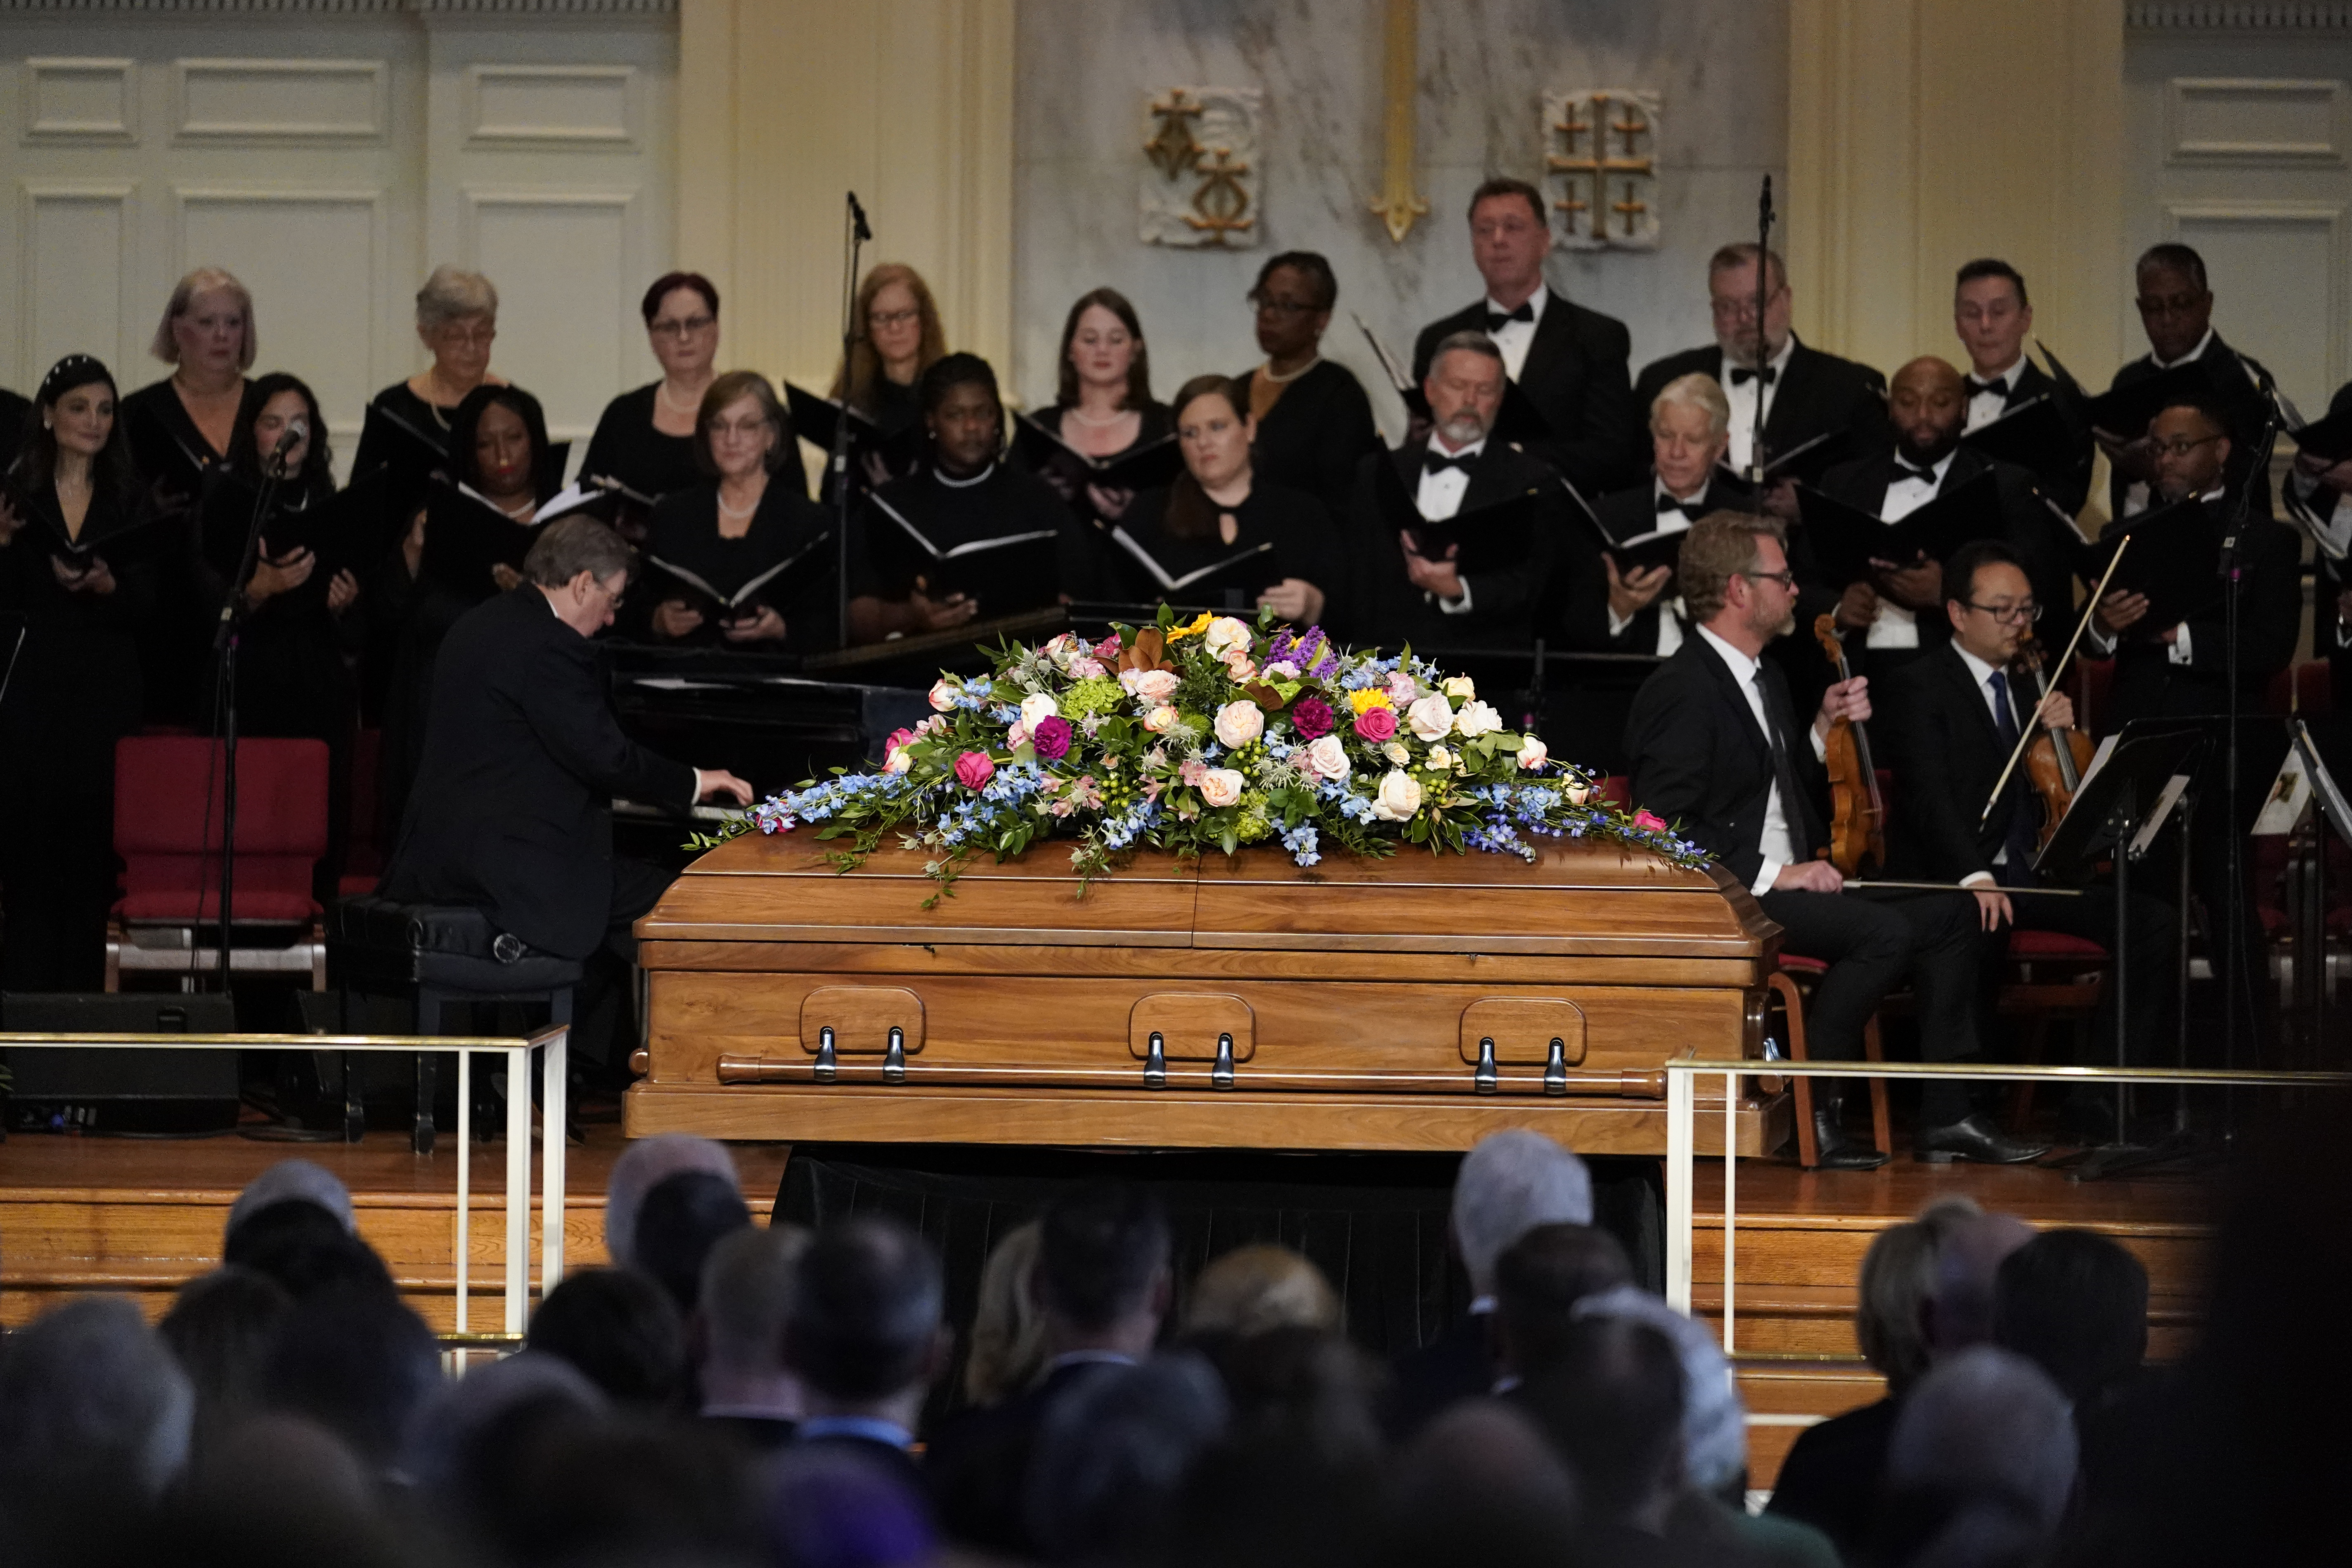 The casket of Rosalynn Carter is seen during a tribute service at Glenn Memorial United Methodist Church at Emory University in Atlanta, Georgia, on November 28, 2023. | Source: Getty Images